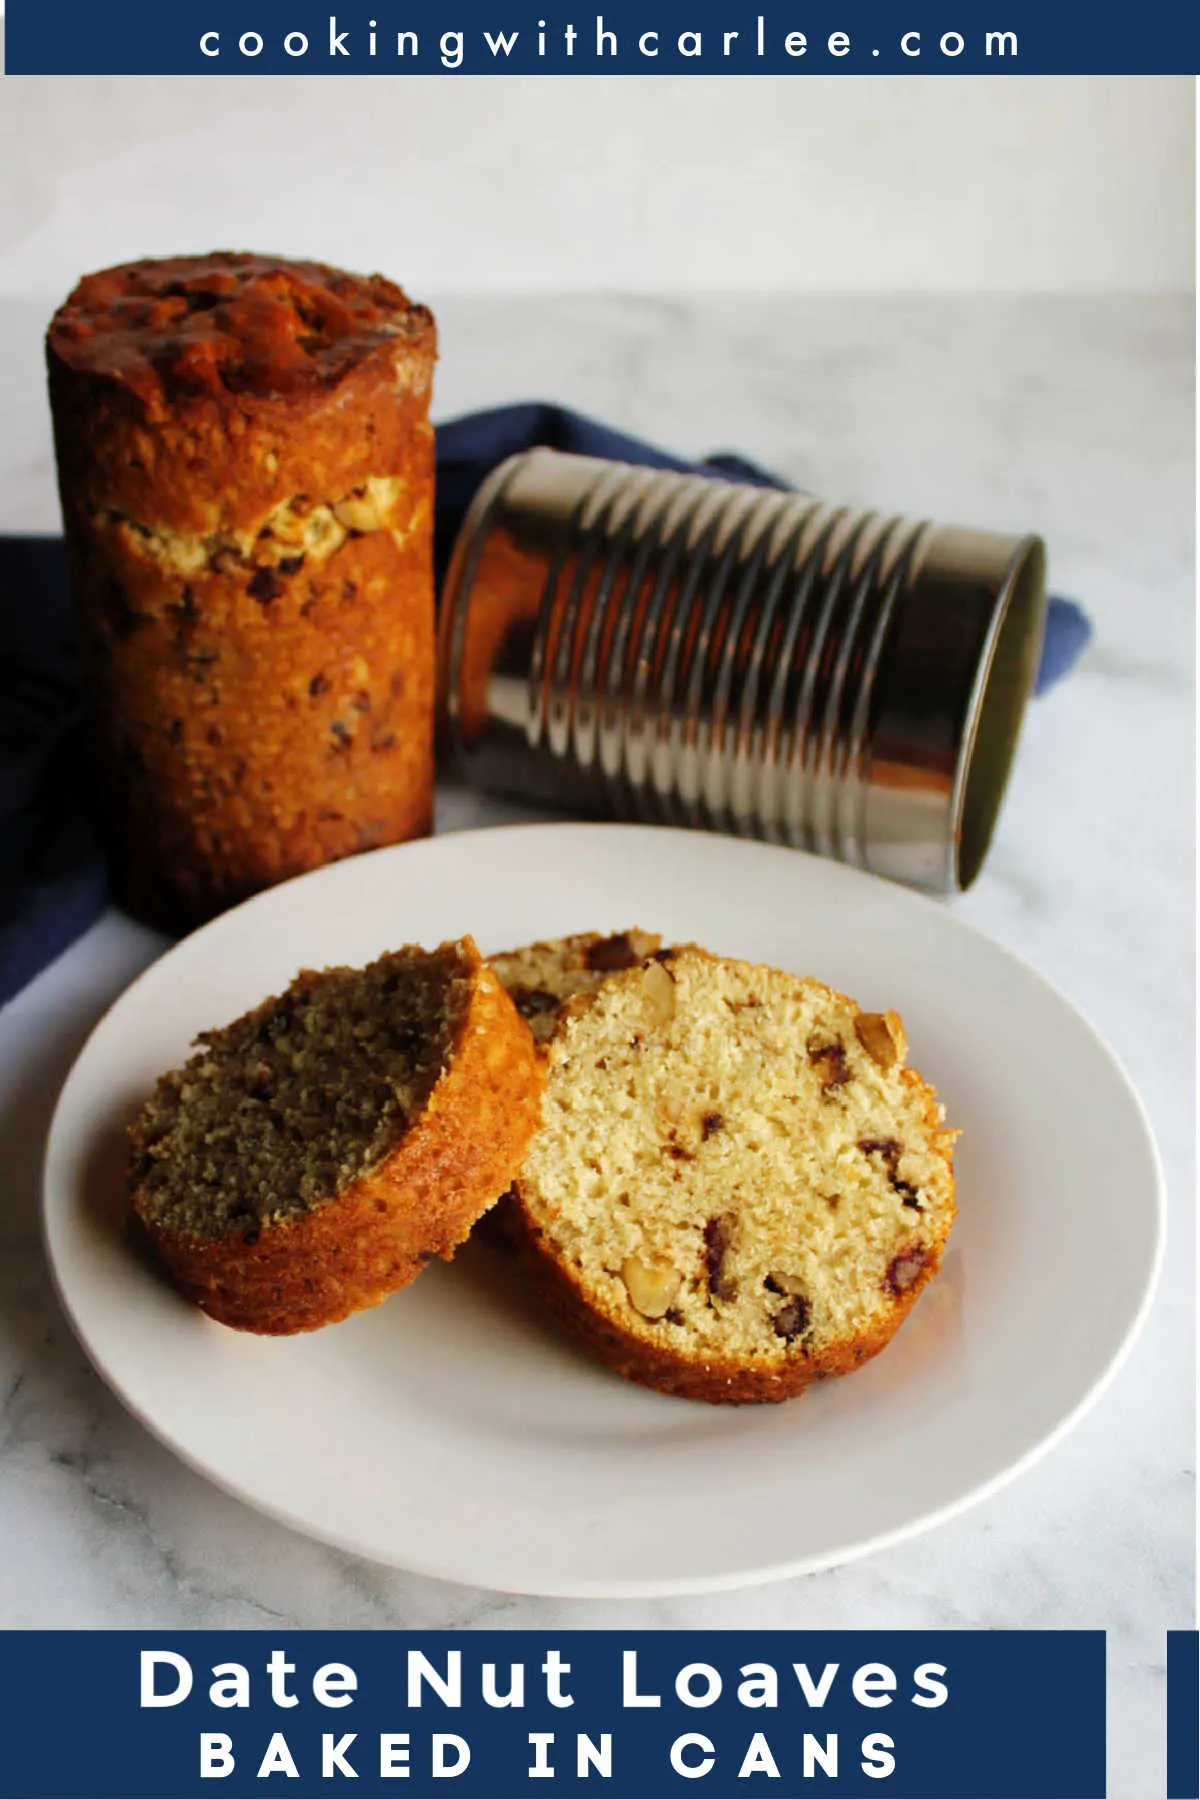 This quick bread is loaded with chopped dates and walnuts for a delicious combination. You could bake it as a loaf, but it is fun to bake it in emptied tin cans for a retro twist.